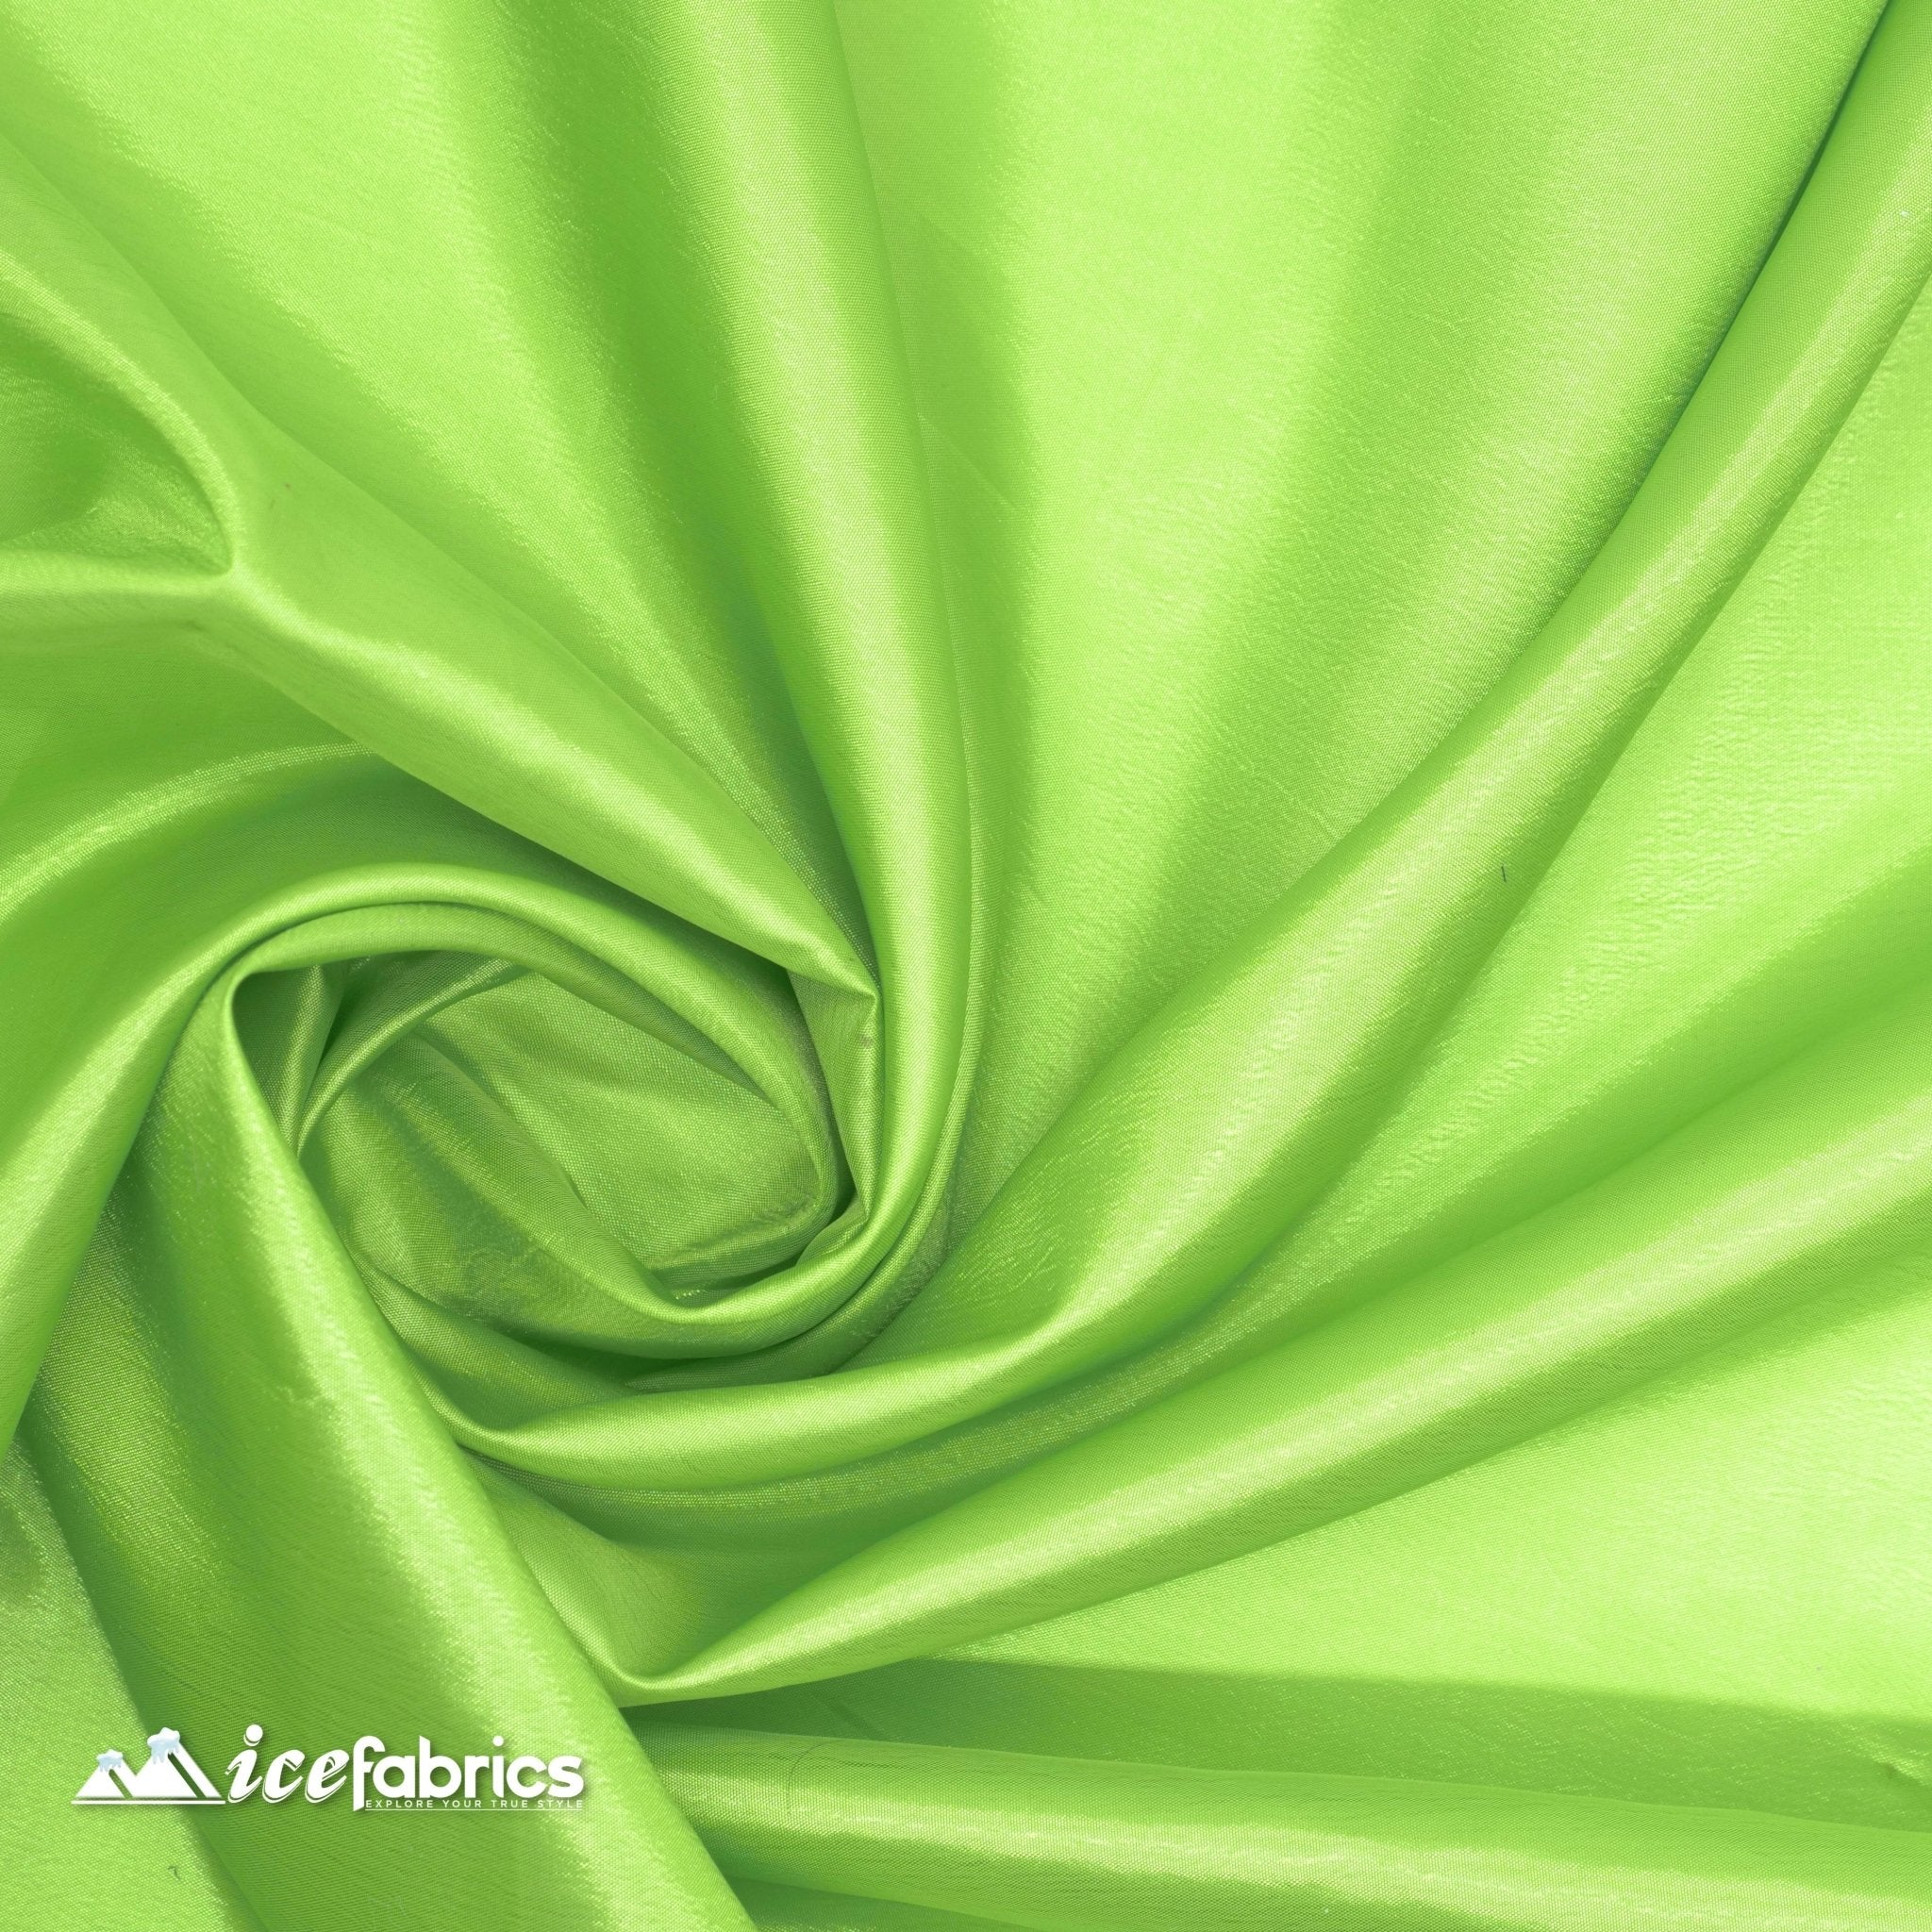 High Quality Solid Taffeta Fabric_ 60" Width_ By The YardTaffeta FabricICEFABRICICE FABRICSLime GreenHigh Quality Solid Taffeta Fabric_ 60" Width_ By The Yard ICEFABRIC Lime Green